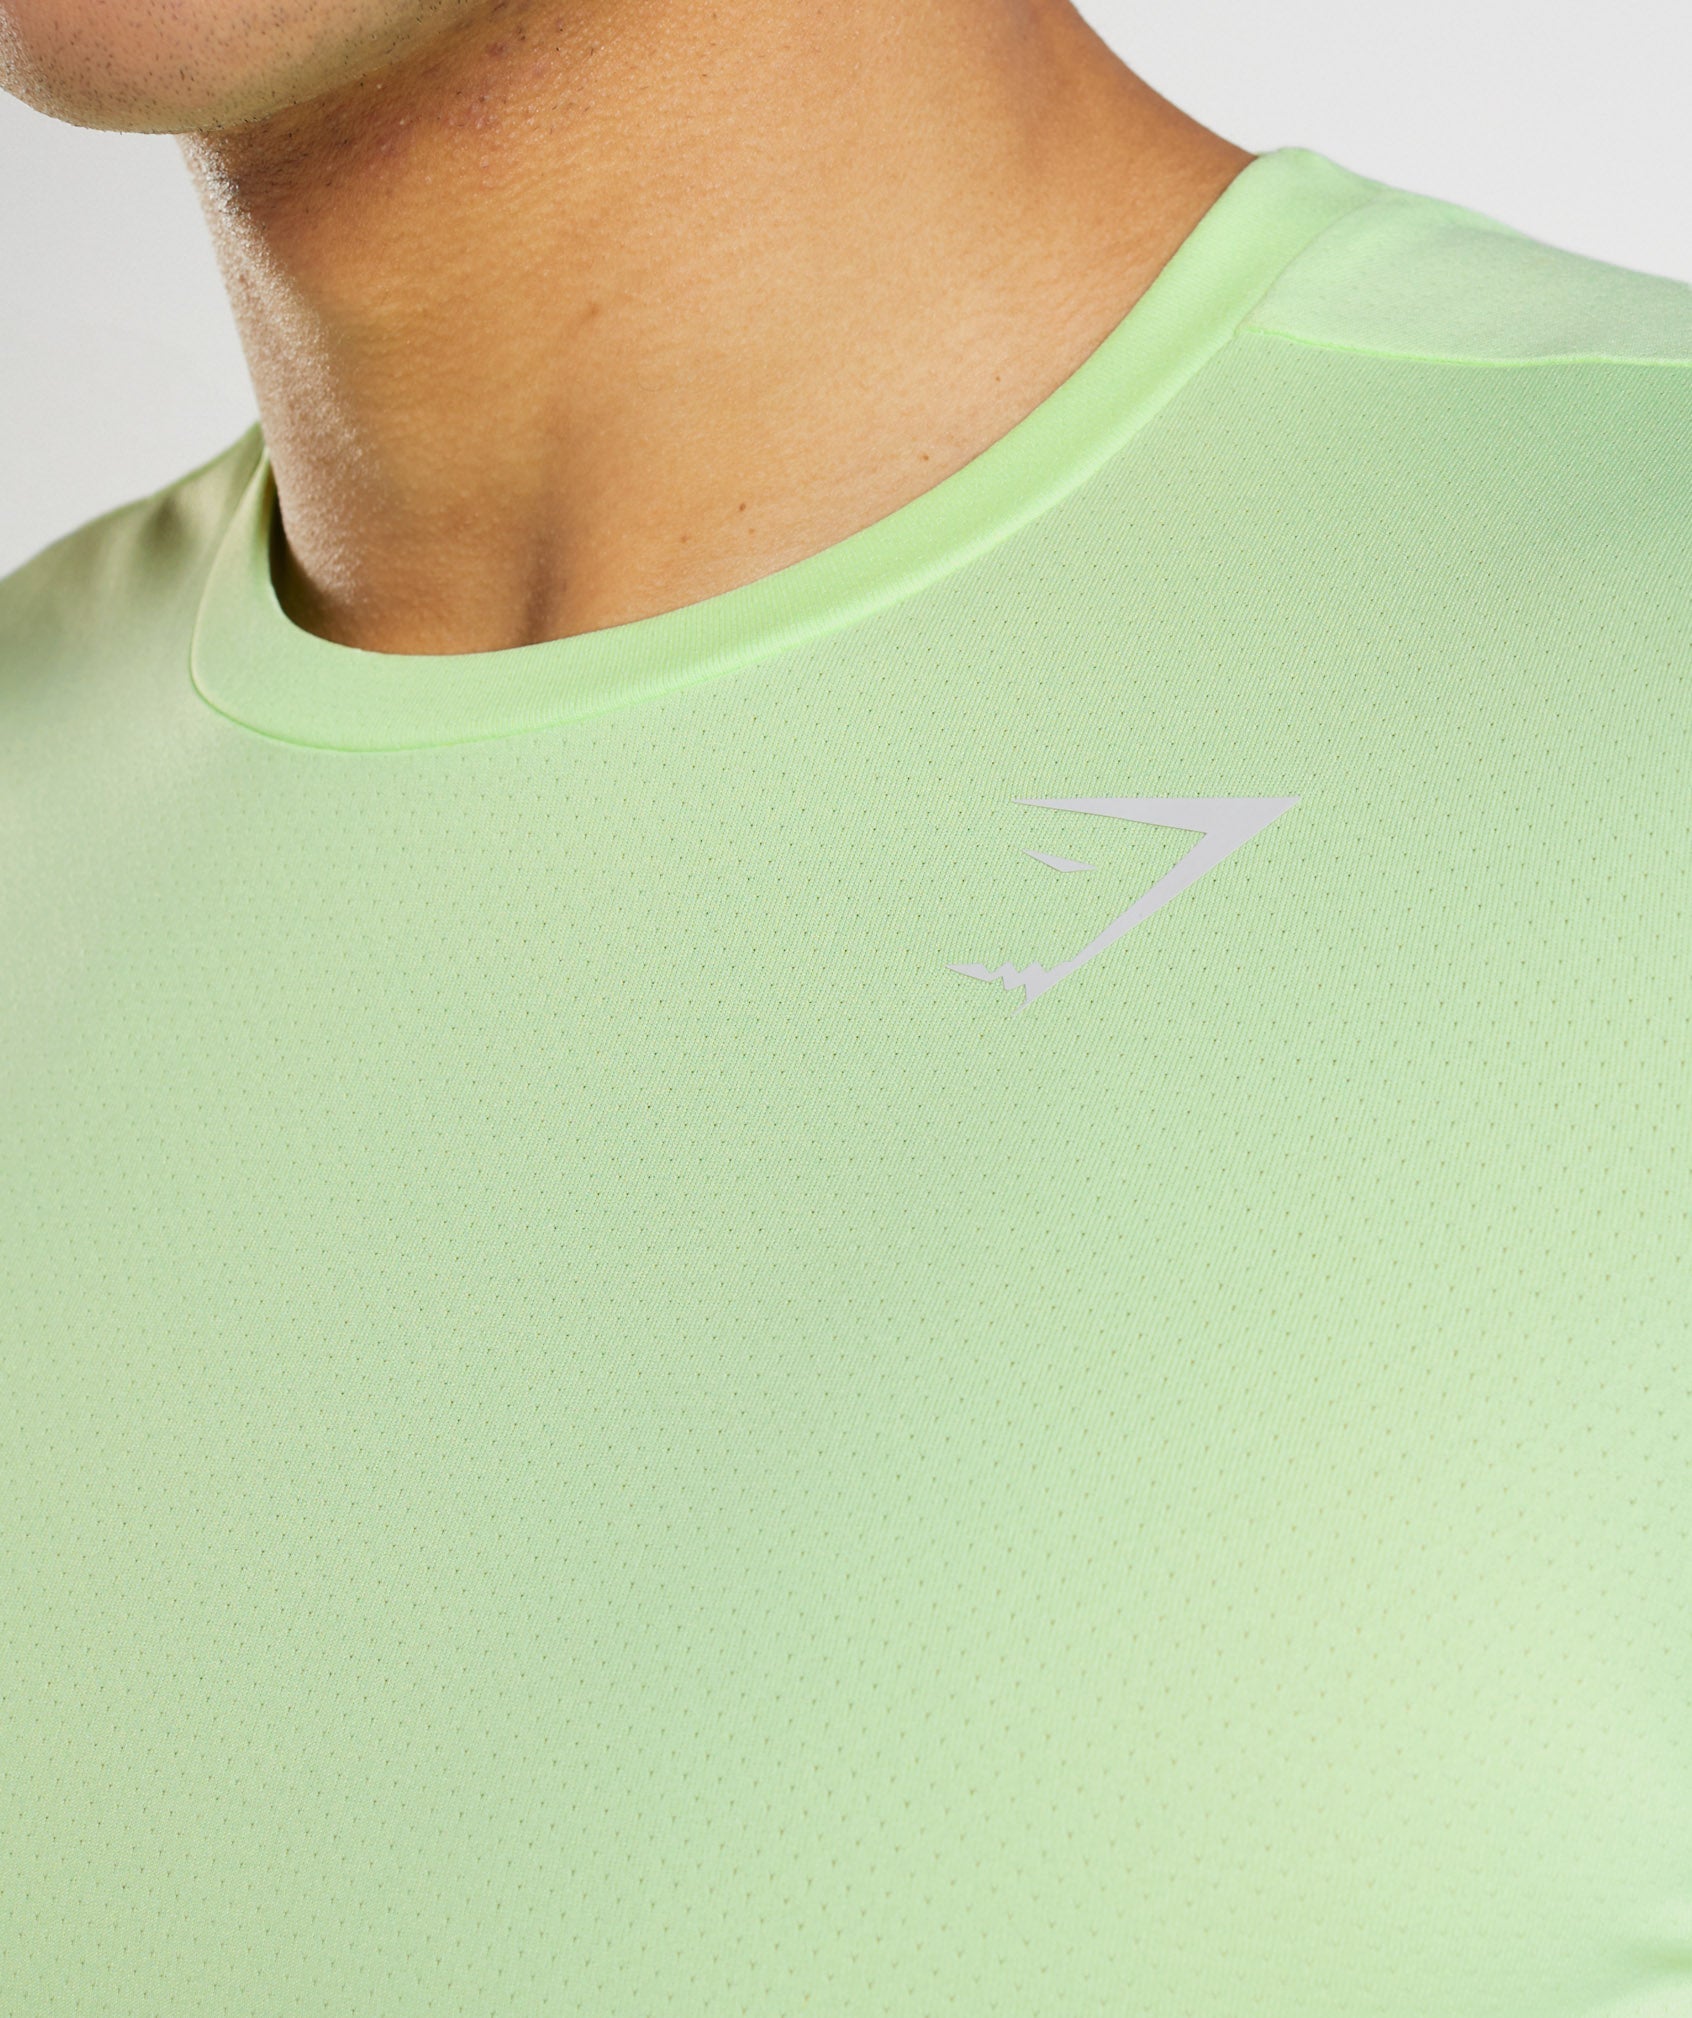 Arrival T-Shirt in Fluo Mint